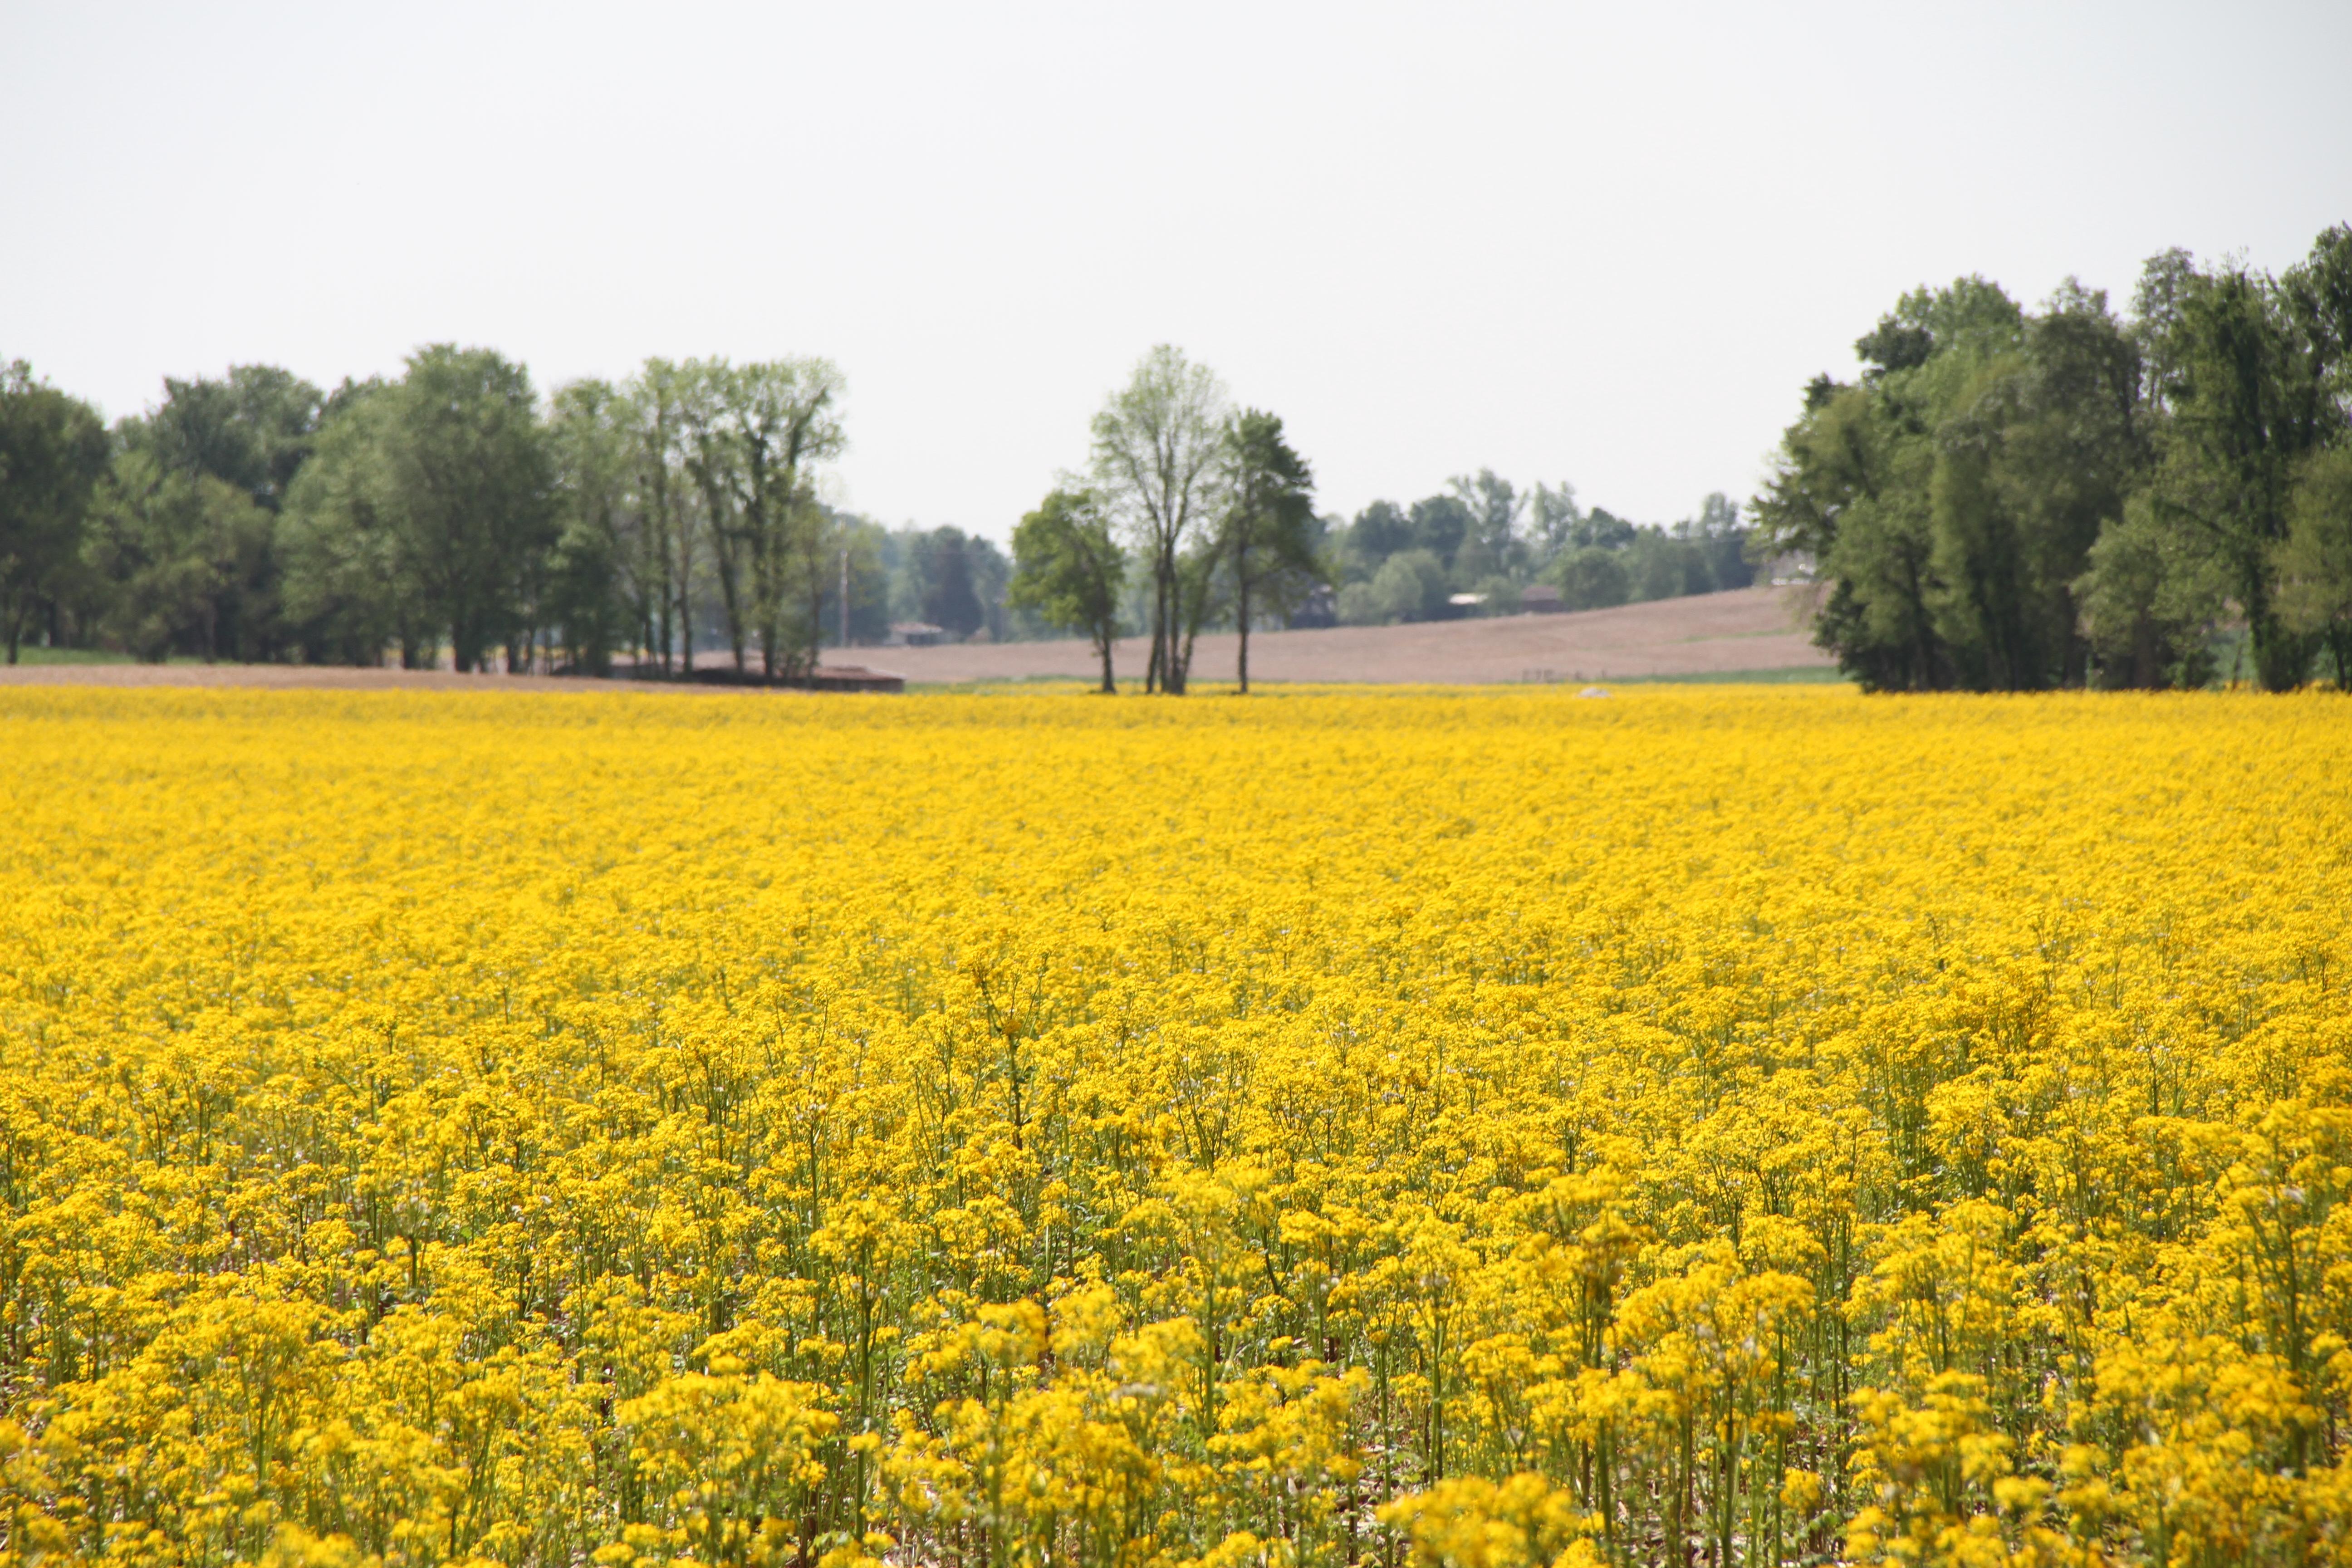 Those yellow flowers showing up in fields and pastures are a toxic weed called butterweed or cressleaf groundsel. (DTN photo by Pamela Smith)